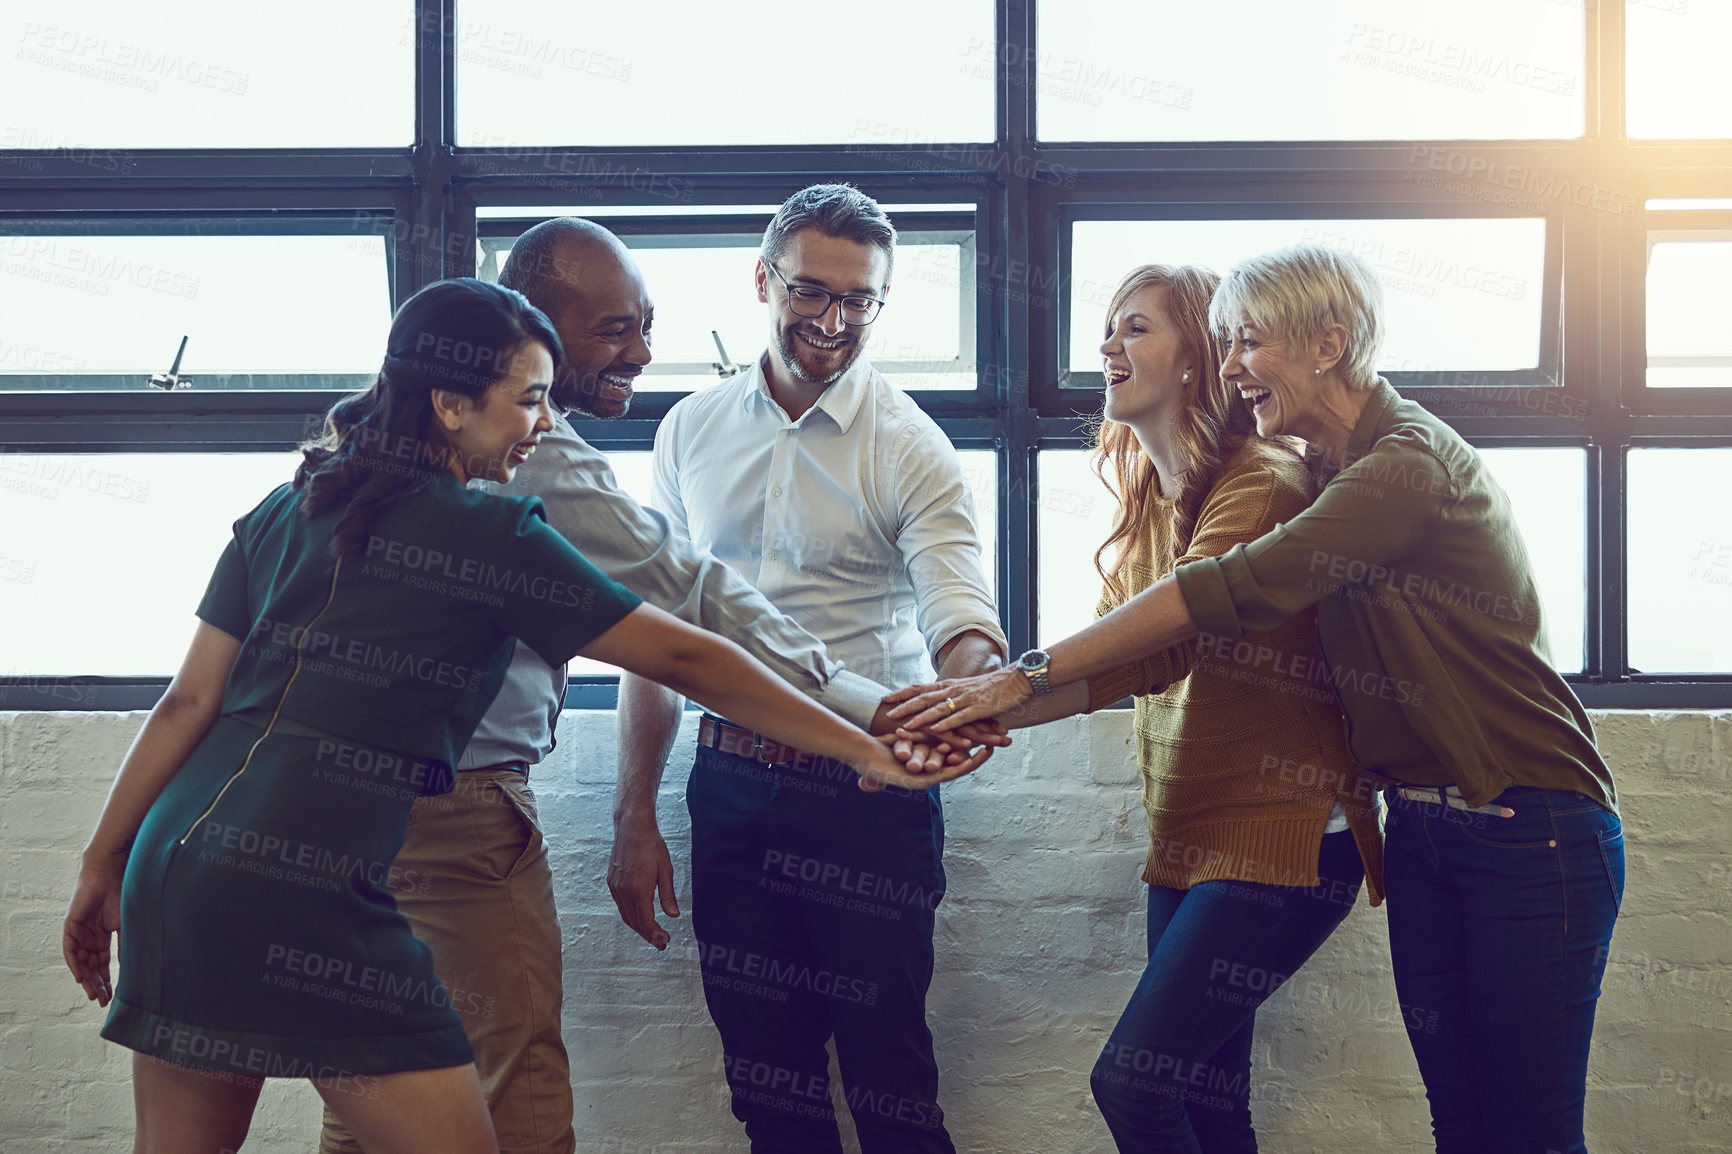 Buy stock photo Shot of a group of colleagues joining their hands in solidarity at work